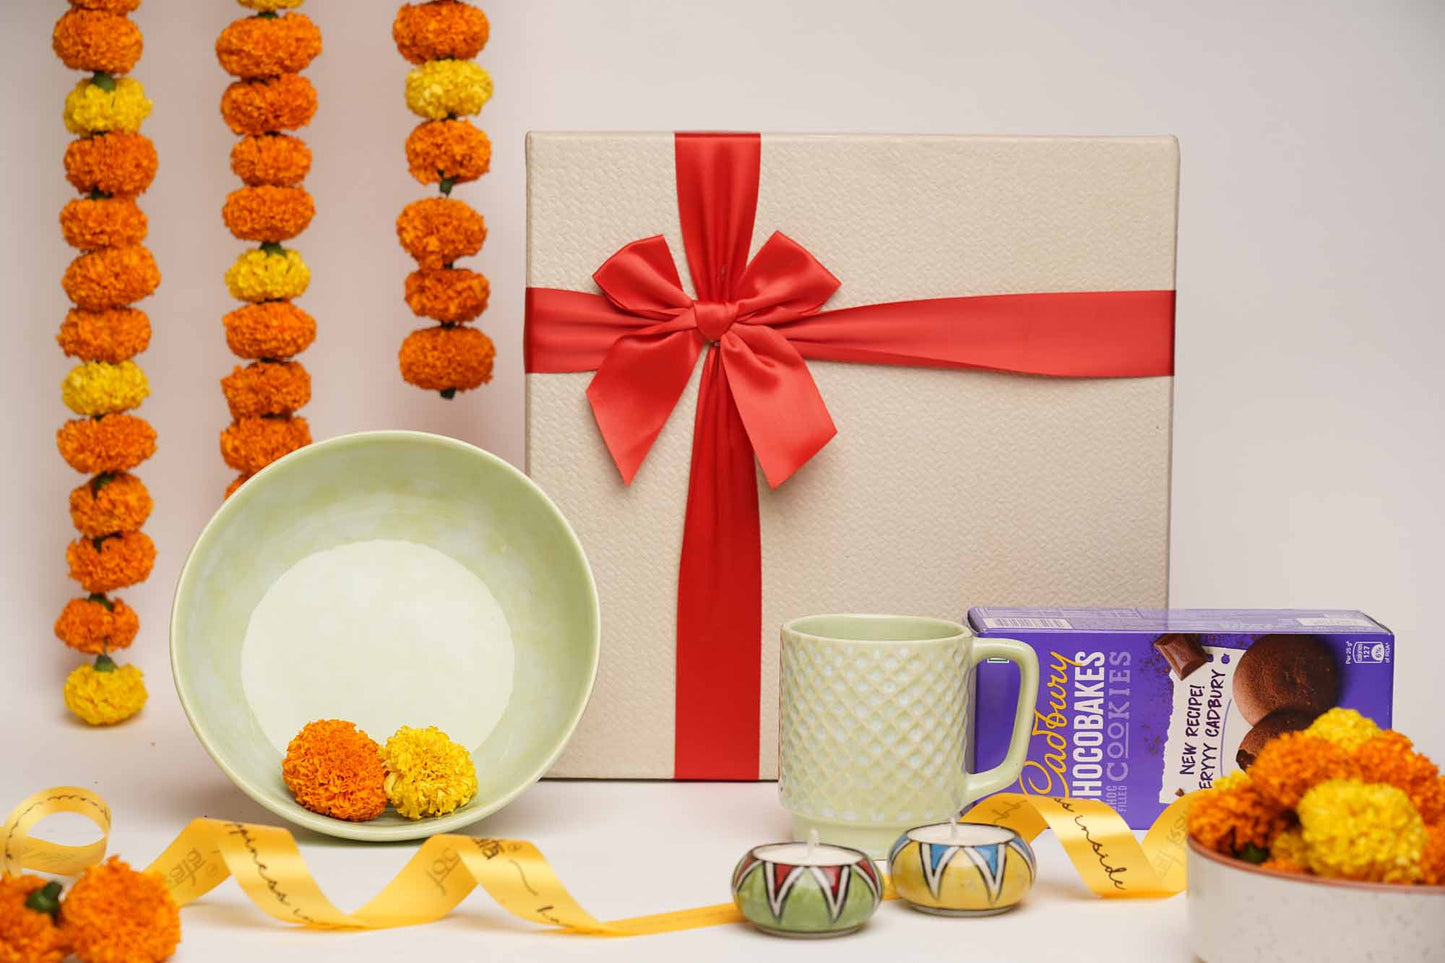 Diwali Gift Box - for a healthy breakfast person